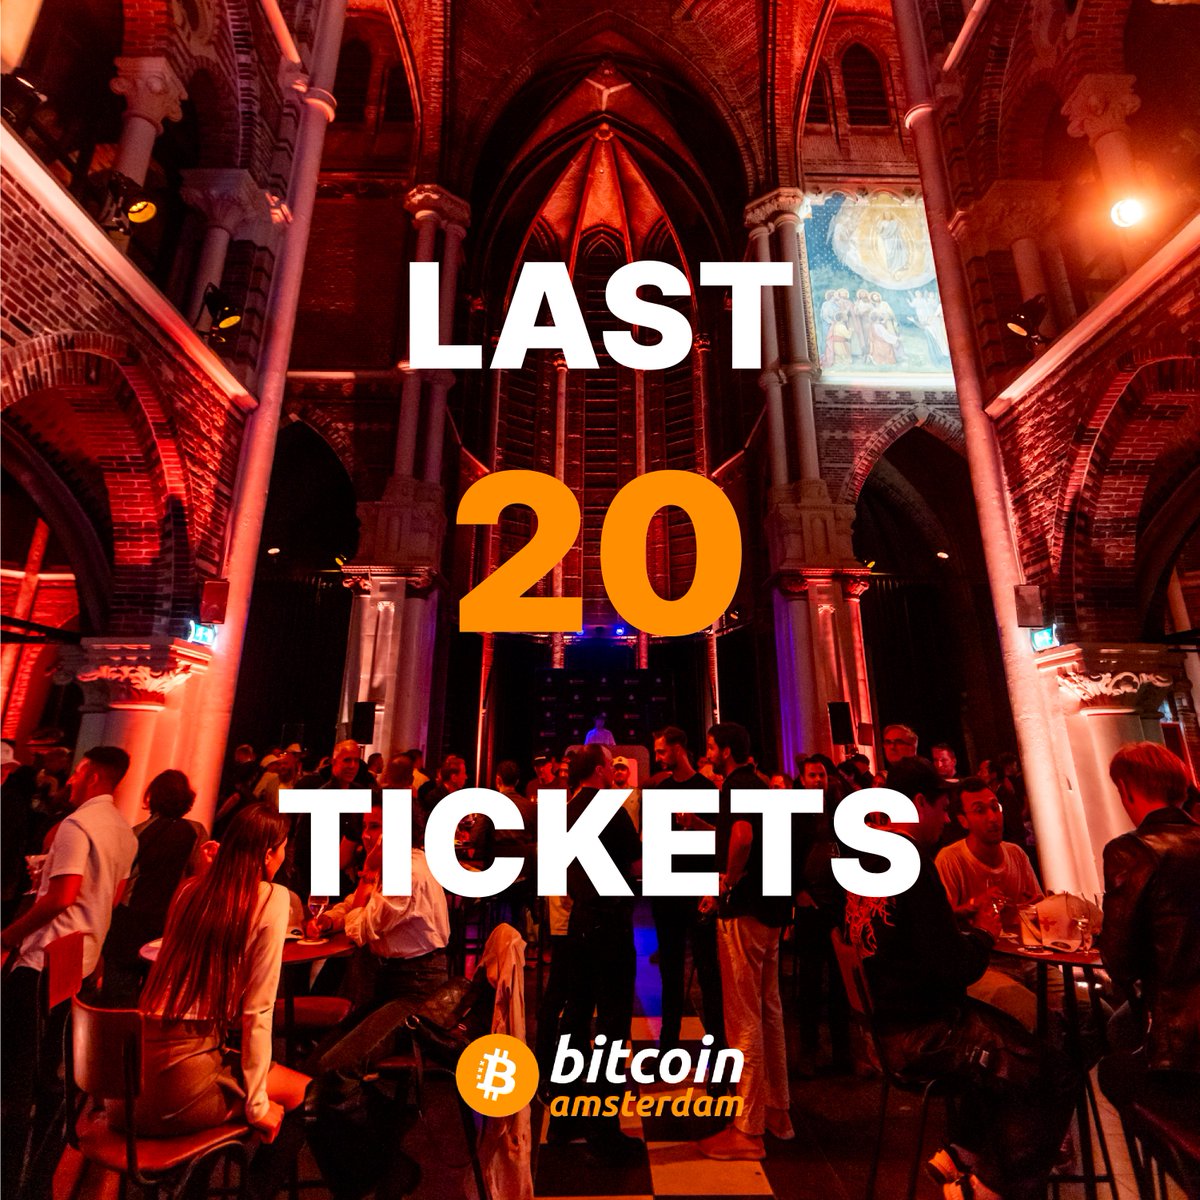 The tickets are flying out the door at Lightning speed! Last 20 tickets left! Join us at Posthoornkerk on April 19th, to spend this historic occasion with the most active members of the community! While you are having a great time, we will keep providing you with tasty food and…